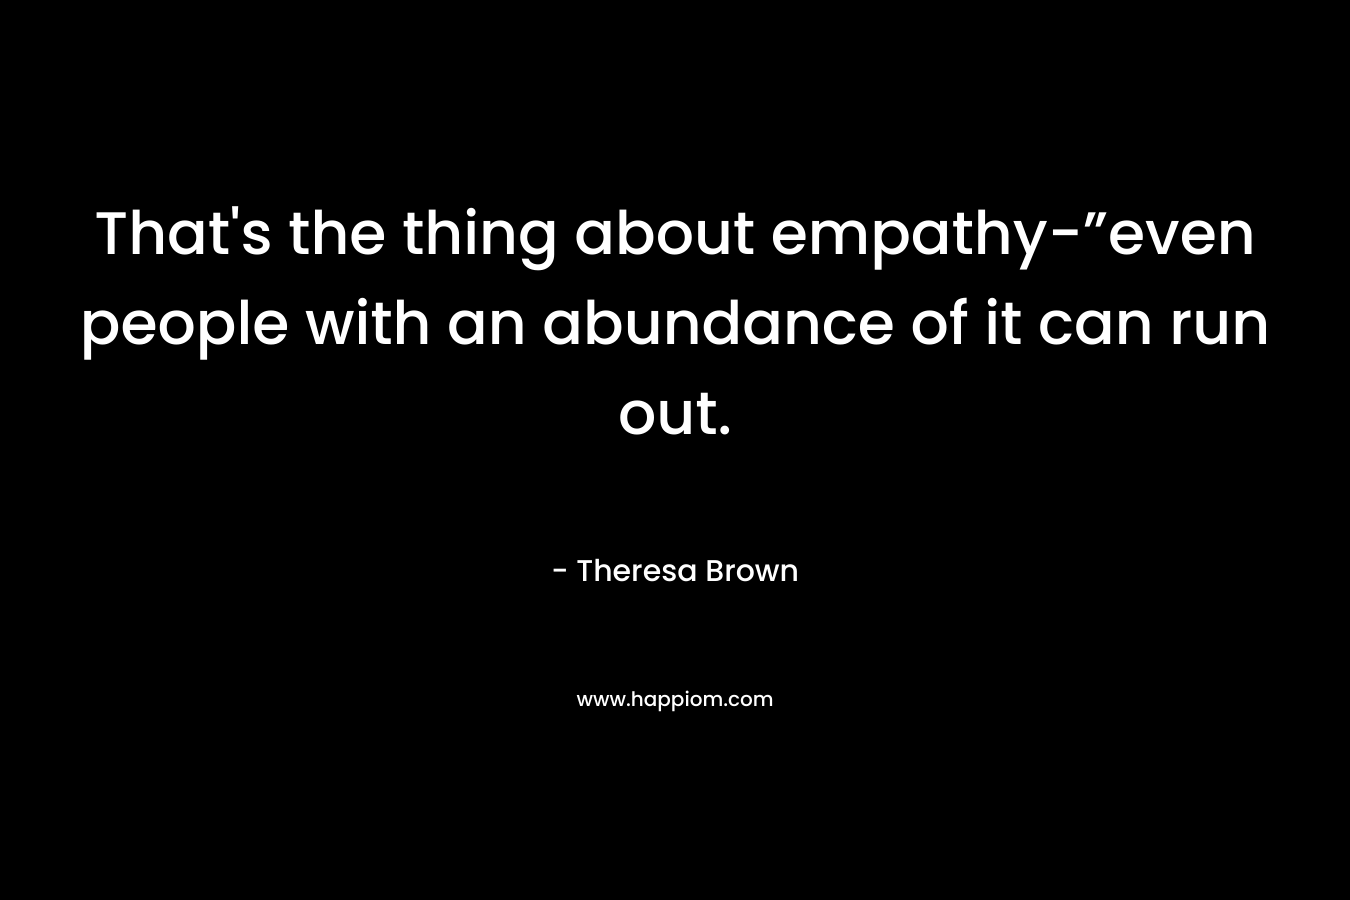 That's the thing about empathy-”even people with an abundance of it can run out.